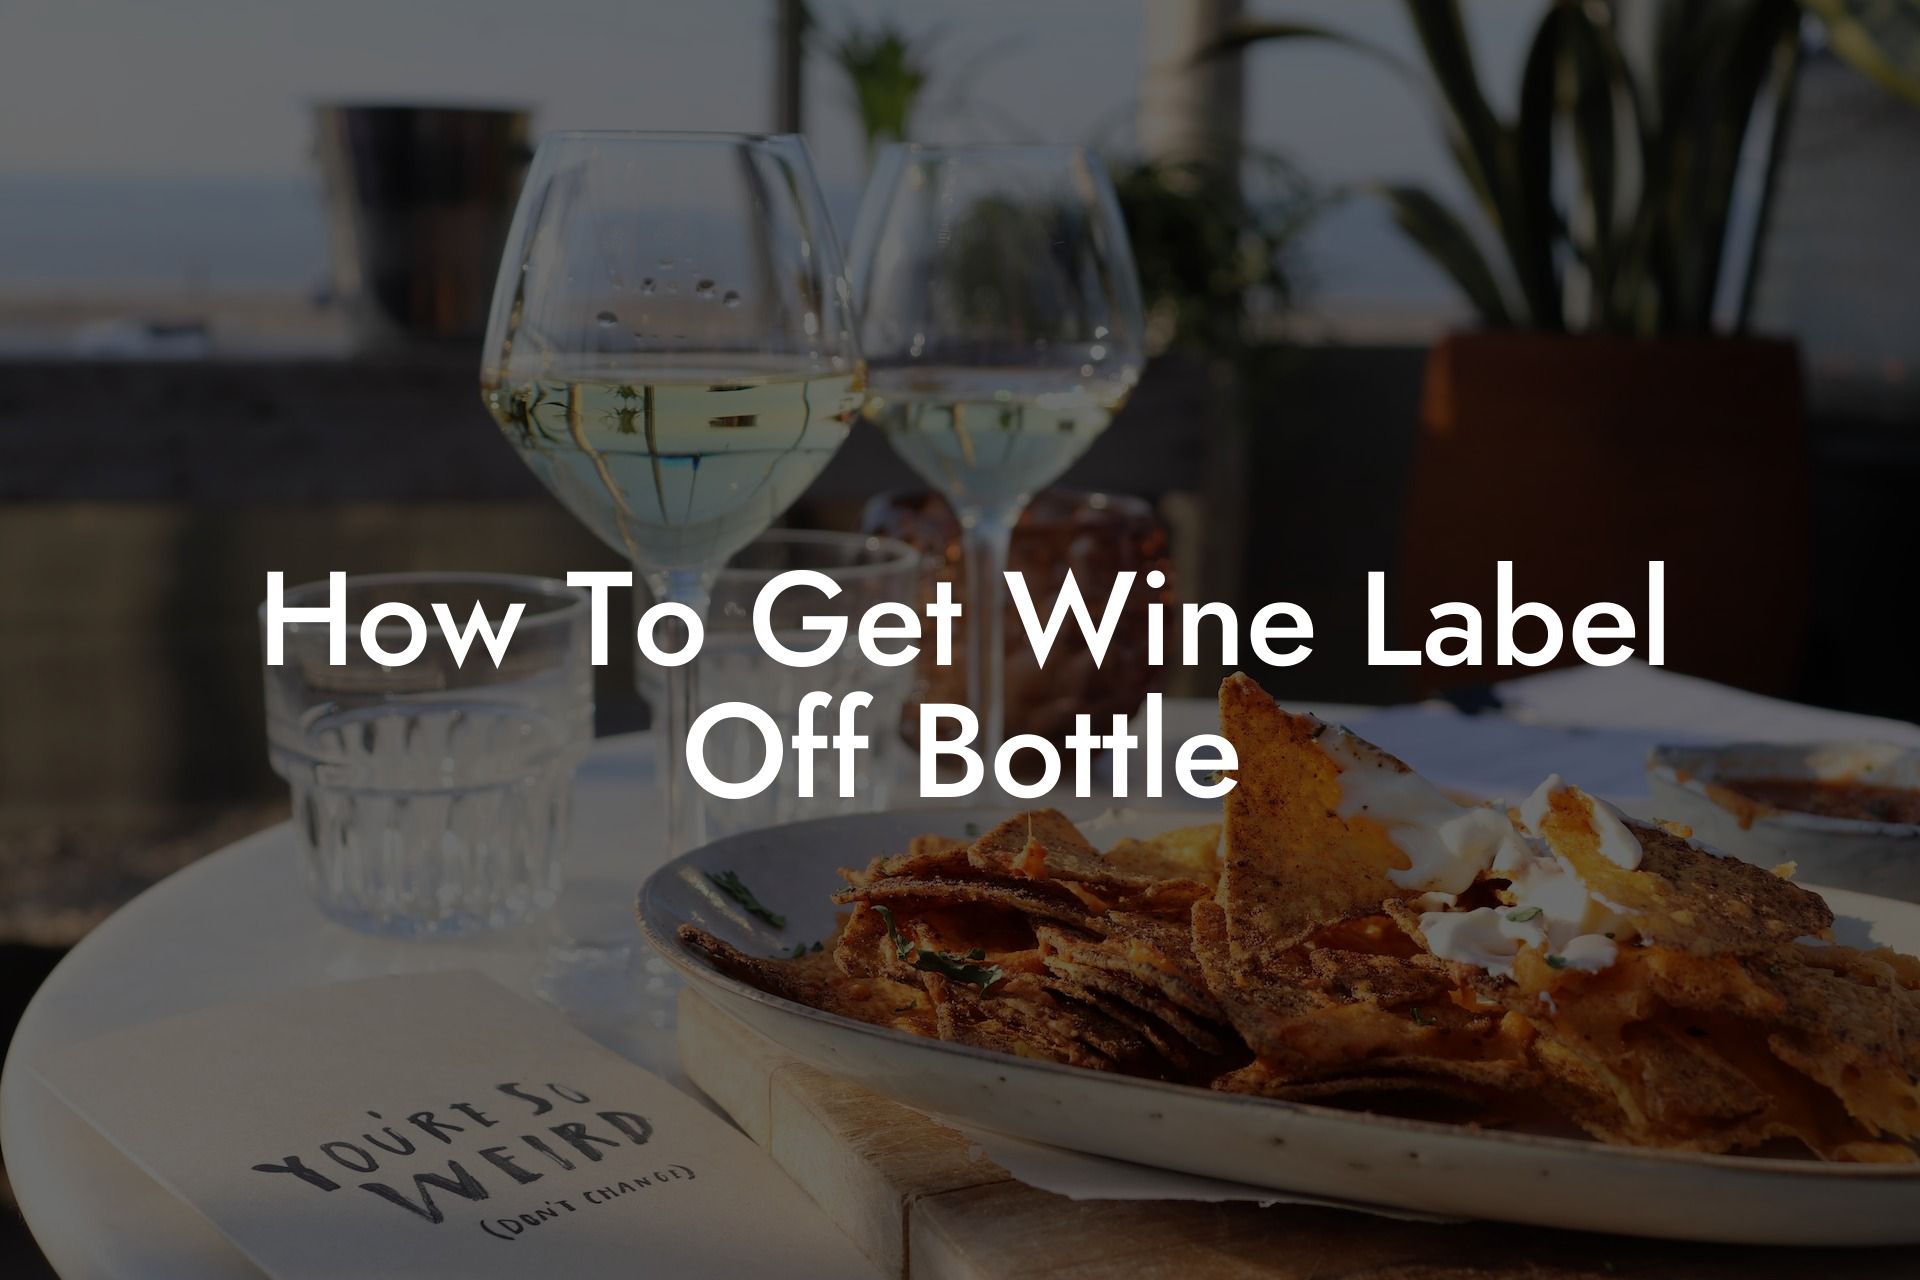 How To Get Wine Label Off Bottle